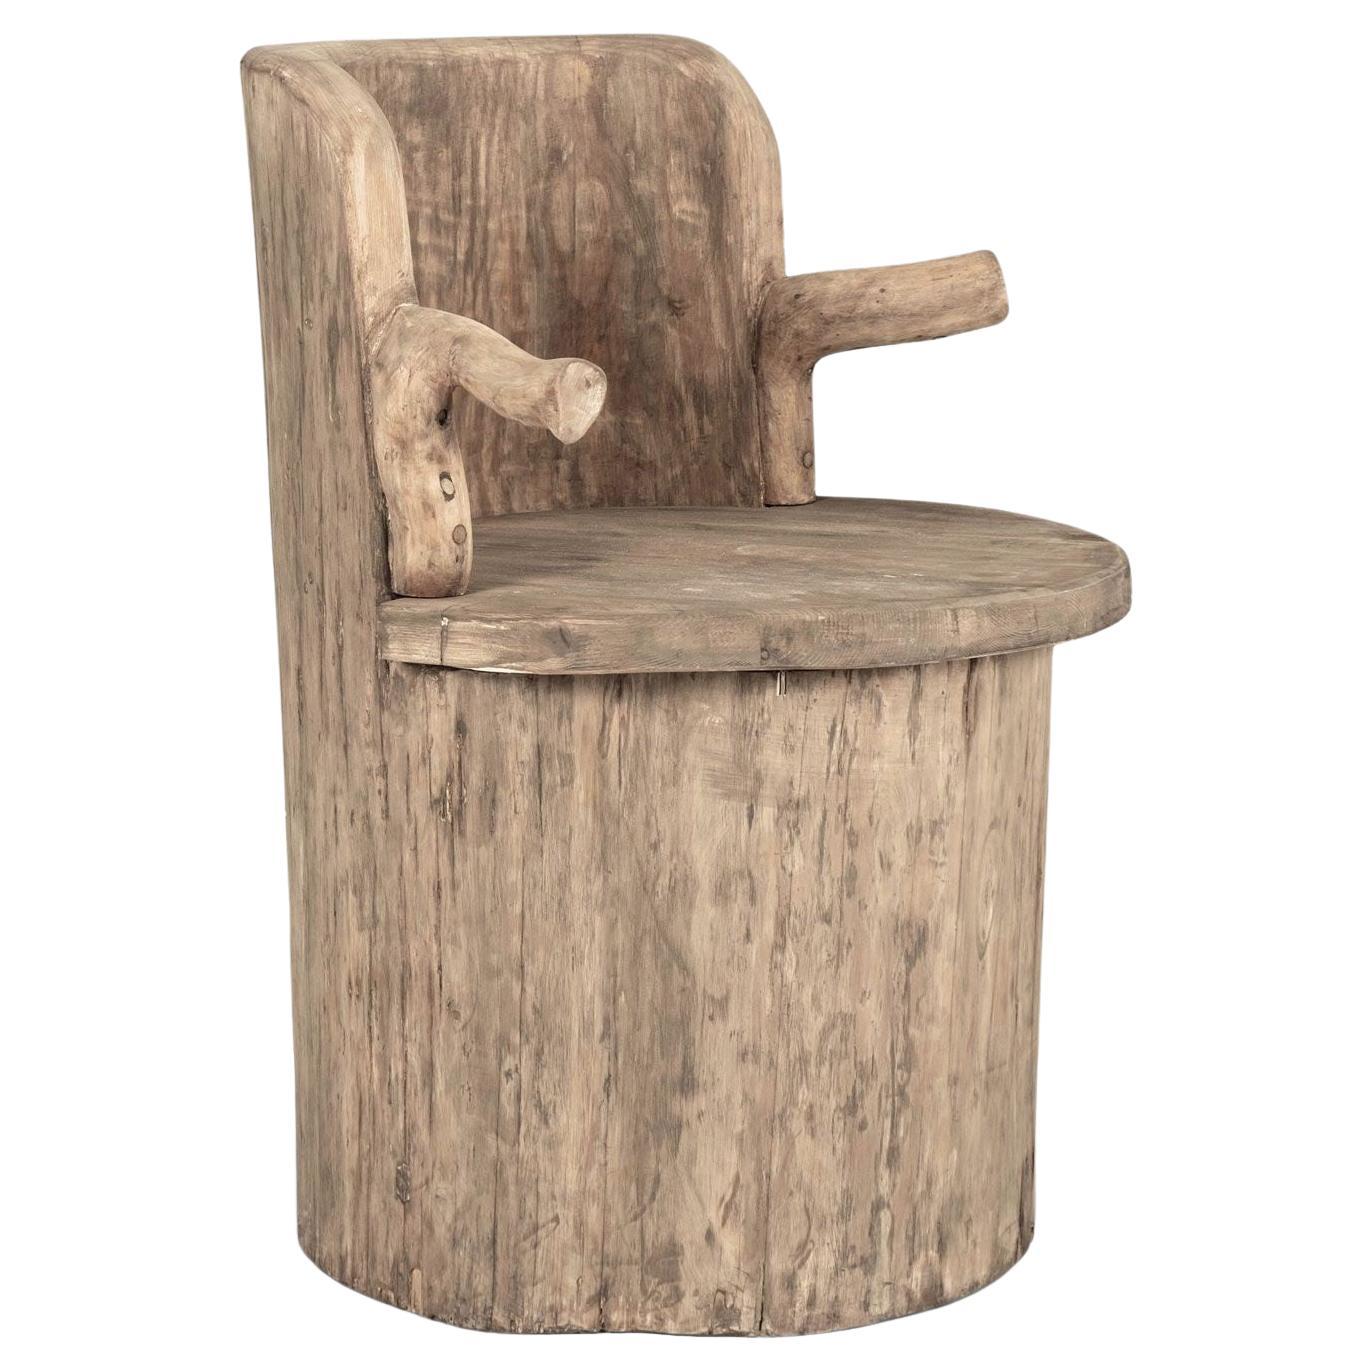 Large-Scale Swedish Pine Dugout Log Armchair (Kubbestol) For Sale